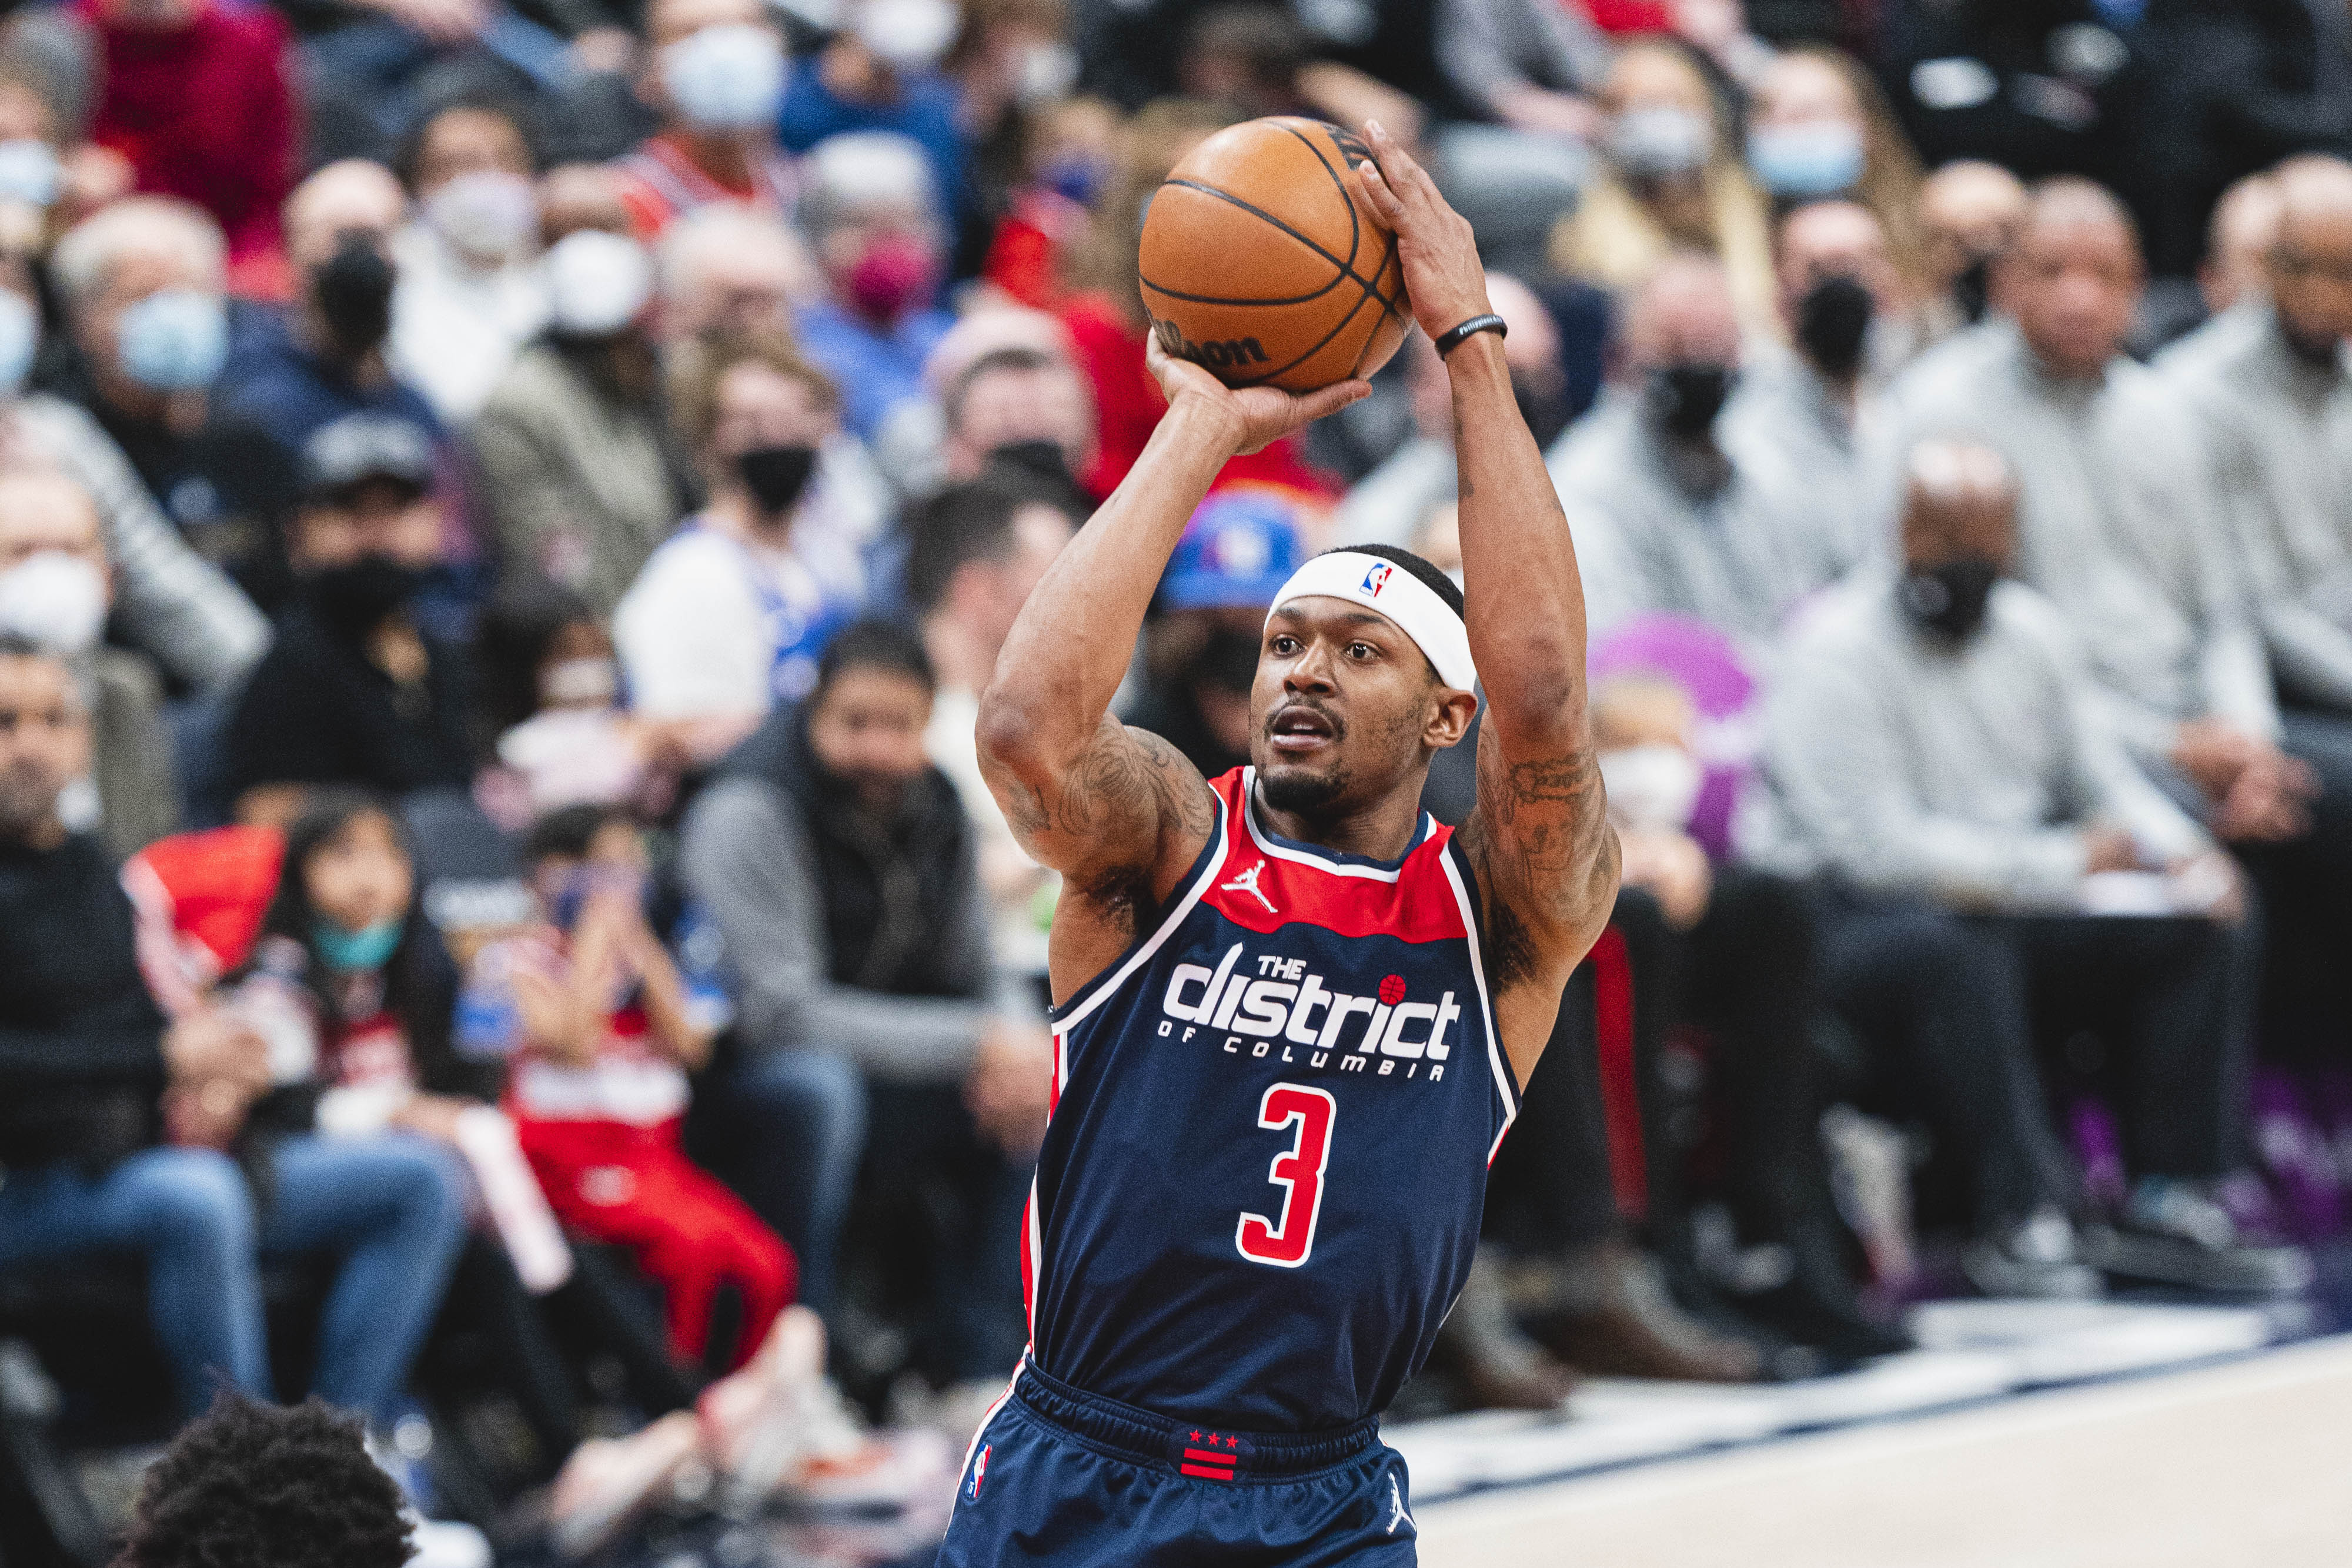 Report: Wizards trying to extend Bradley Beal rather than trade him